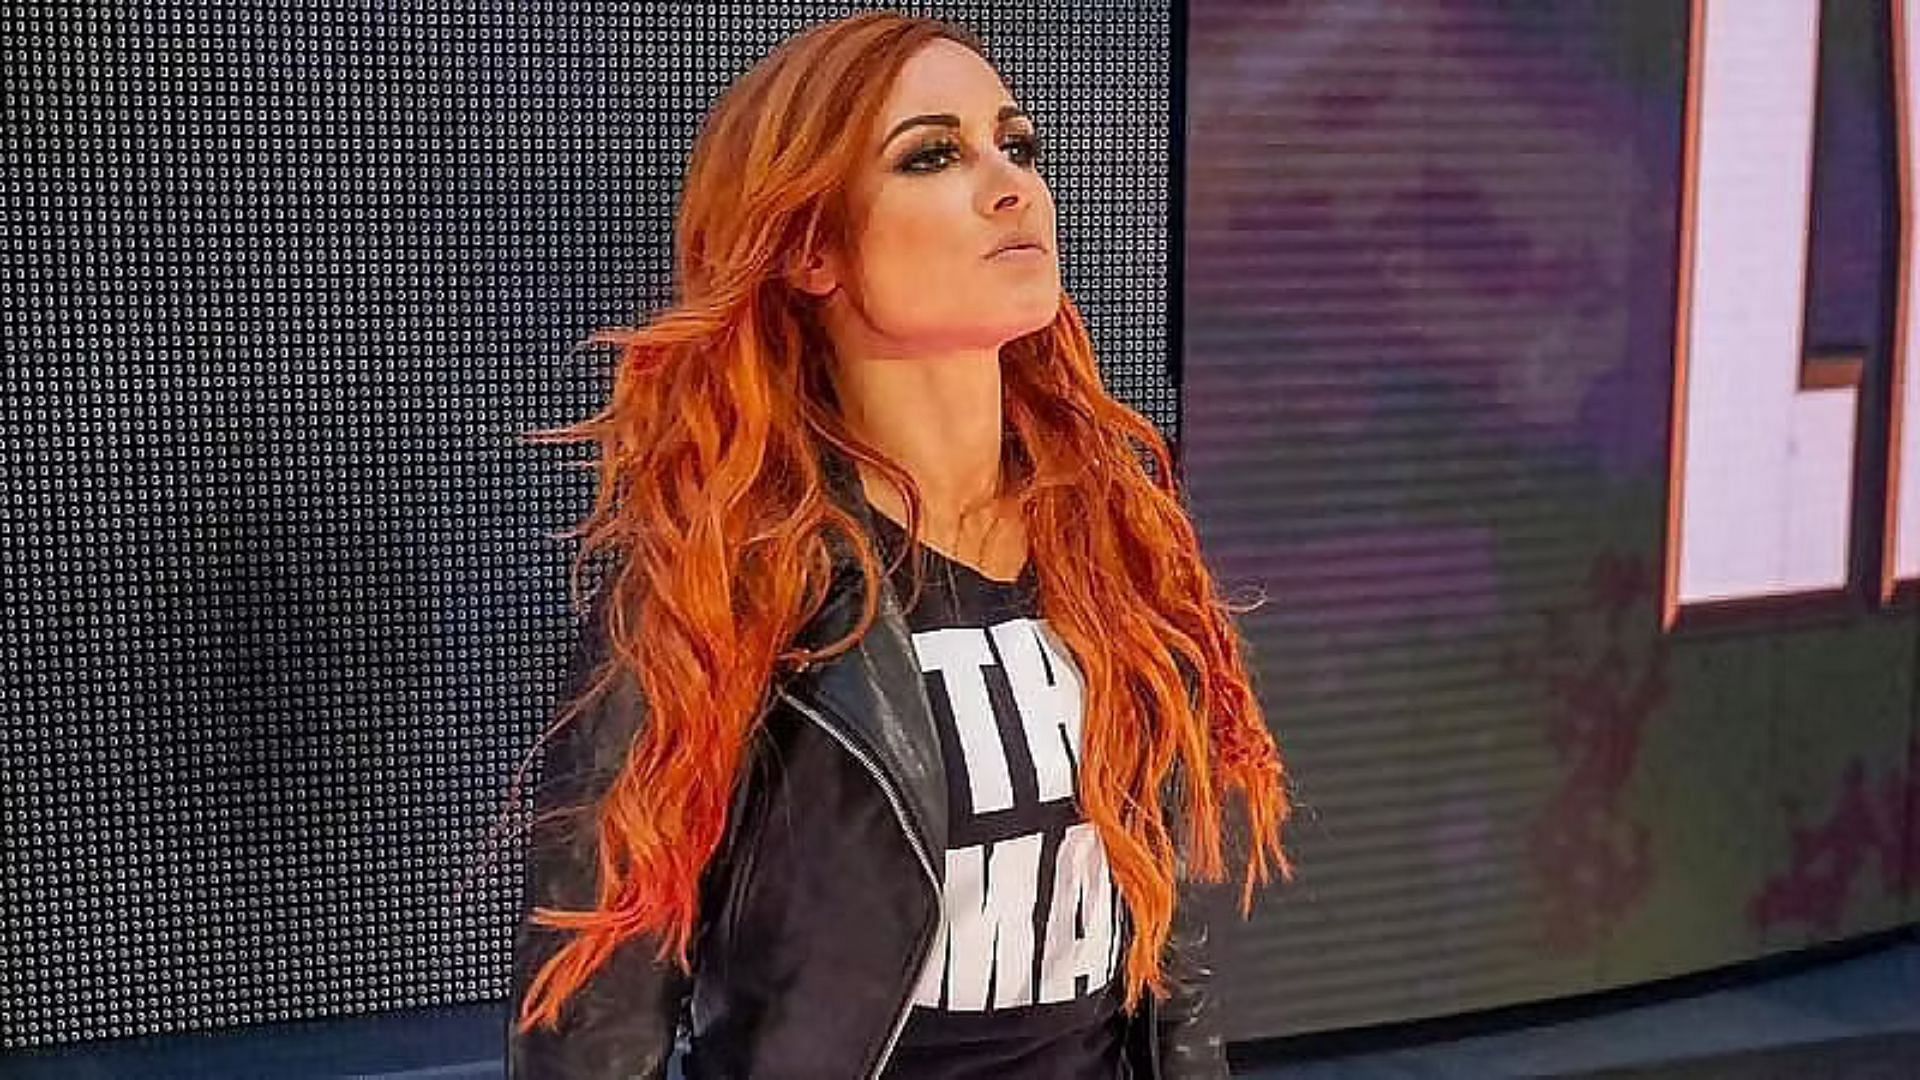 Becky Lynch initially wanted to return at WrestleMania 37.